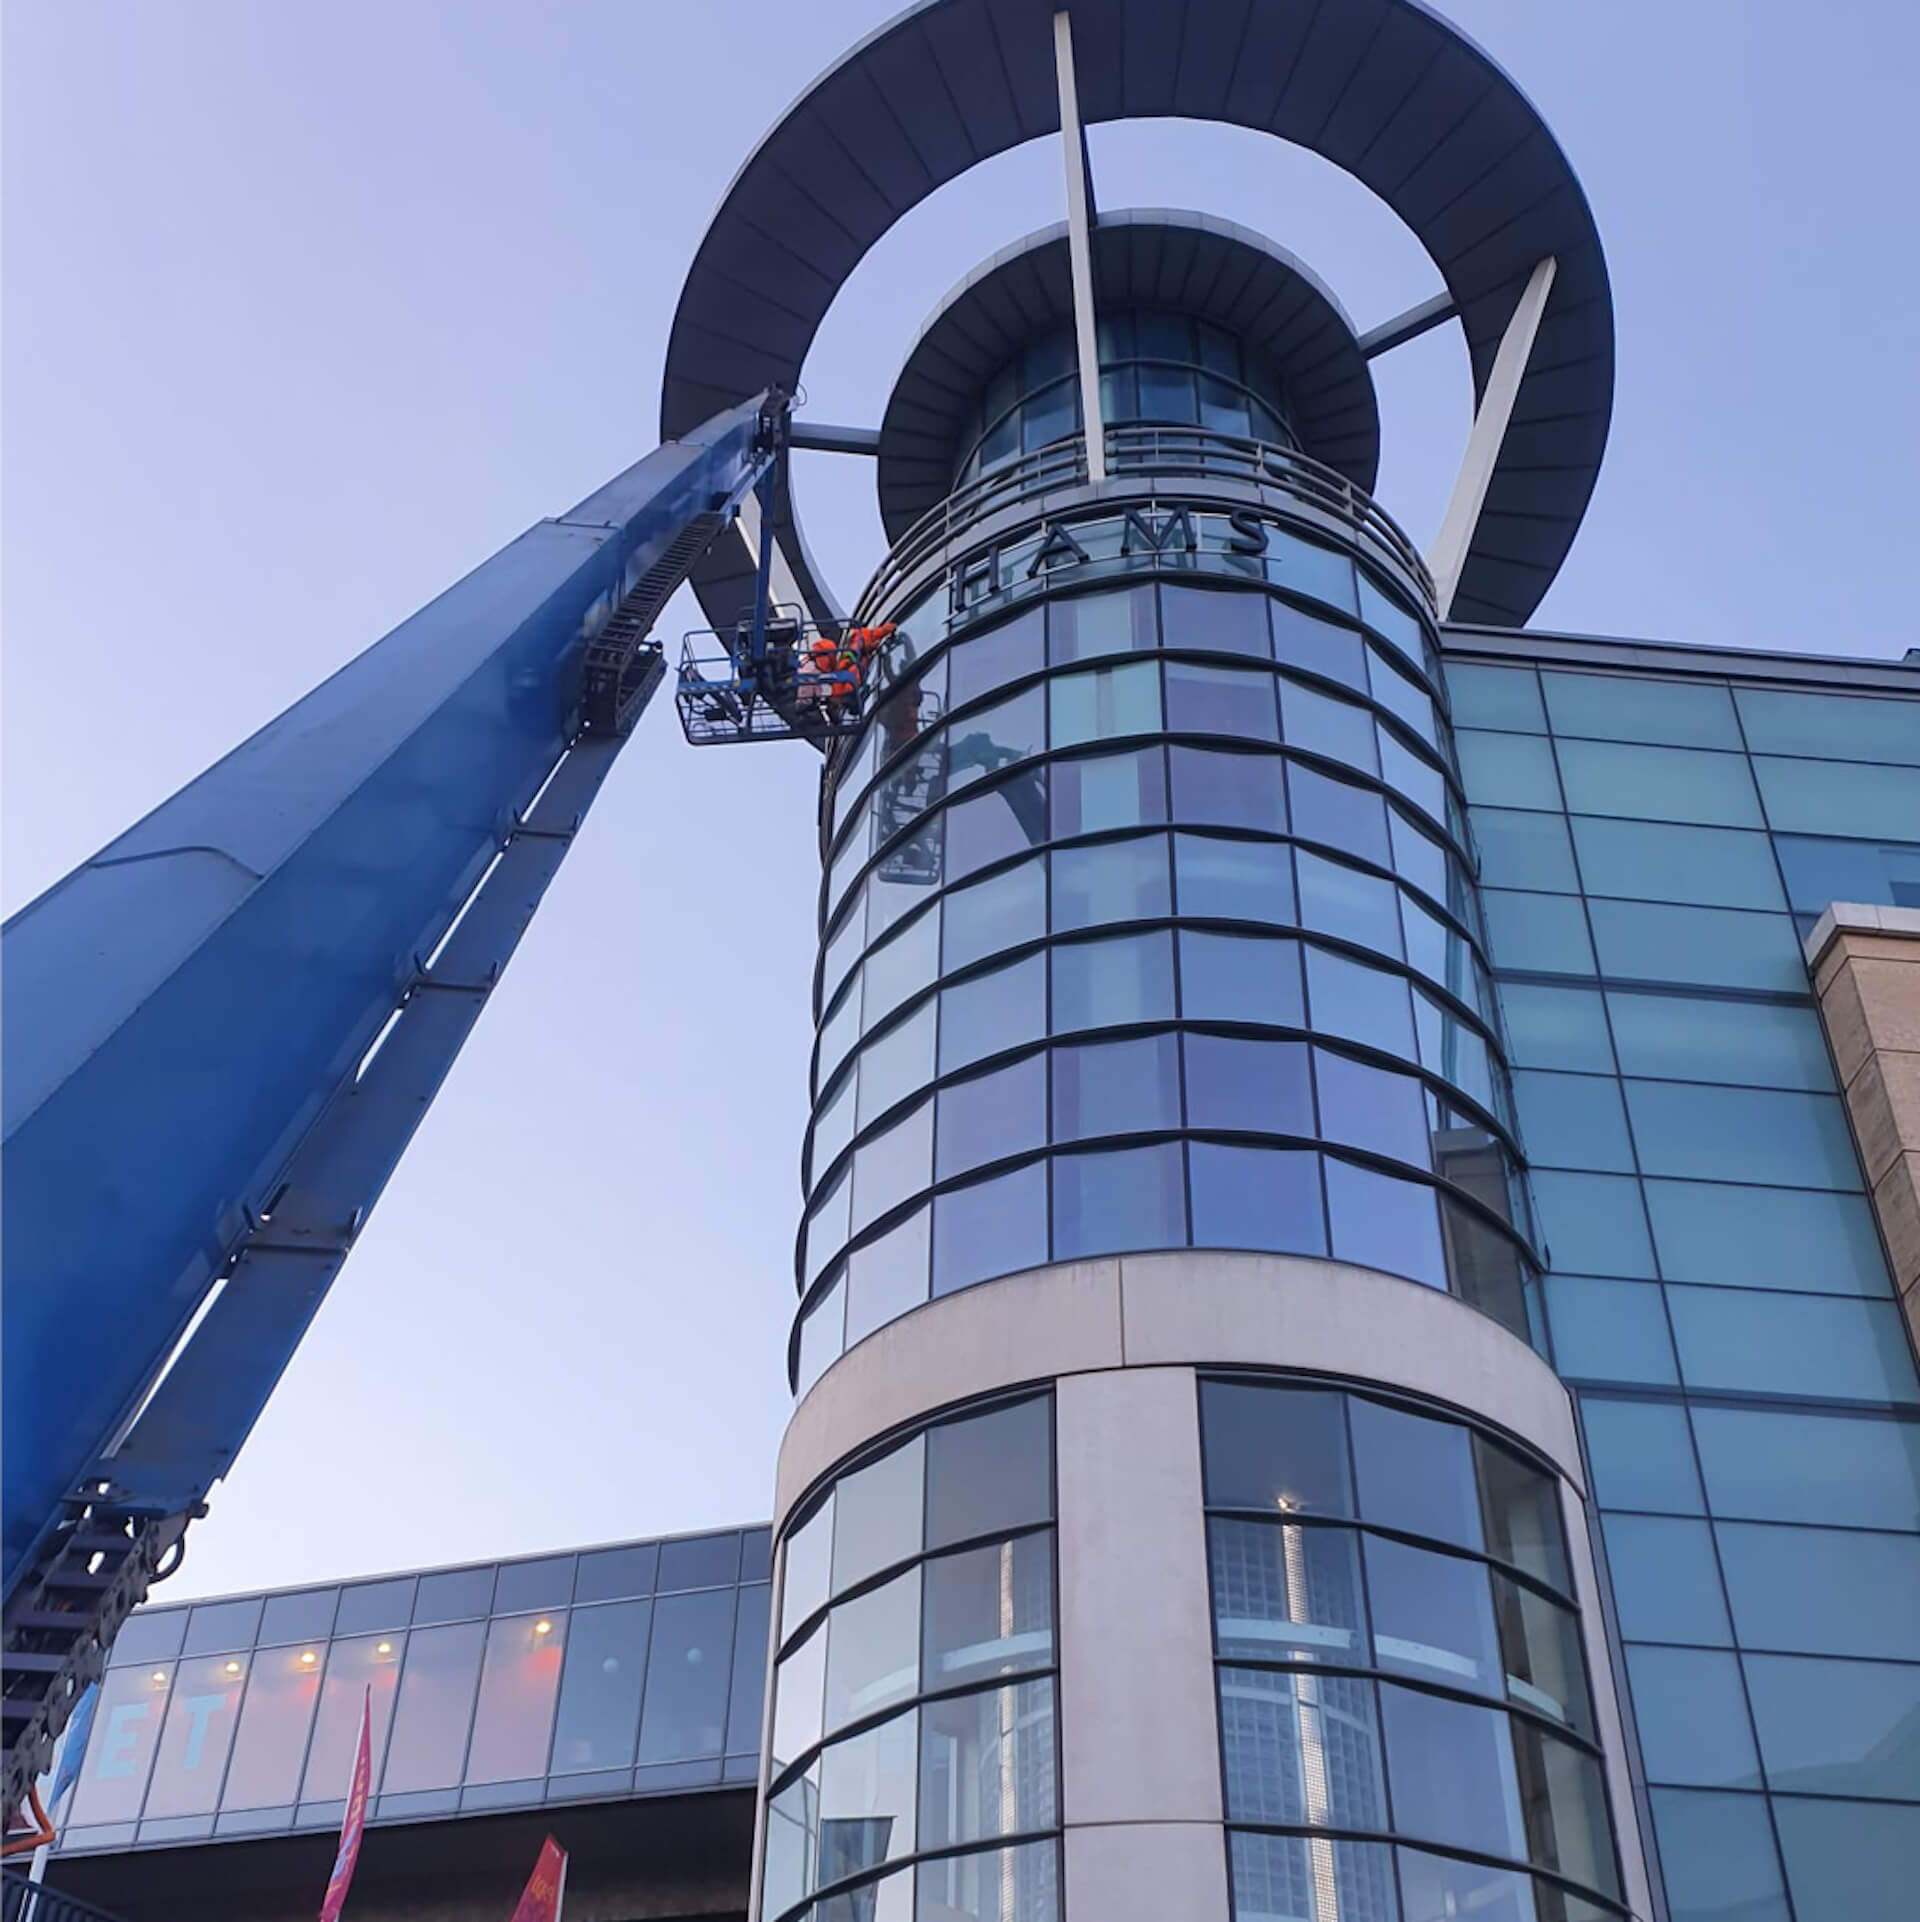 sky view of a Debenhams store's glass round shaped building. A crane is next to it with a worker on the crane lift.